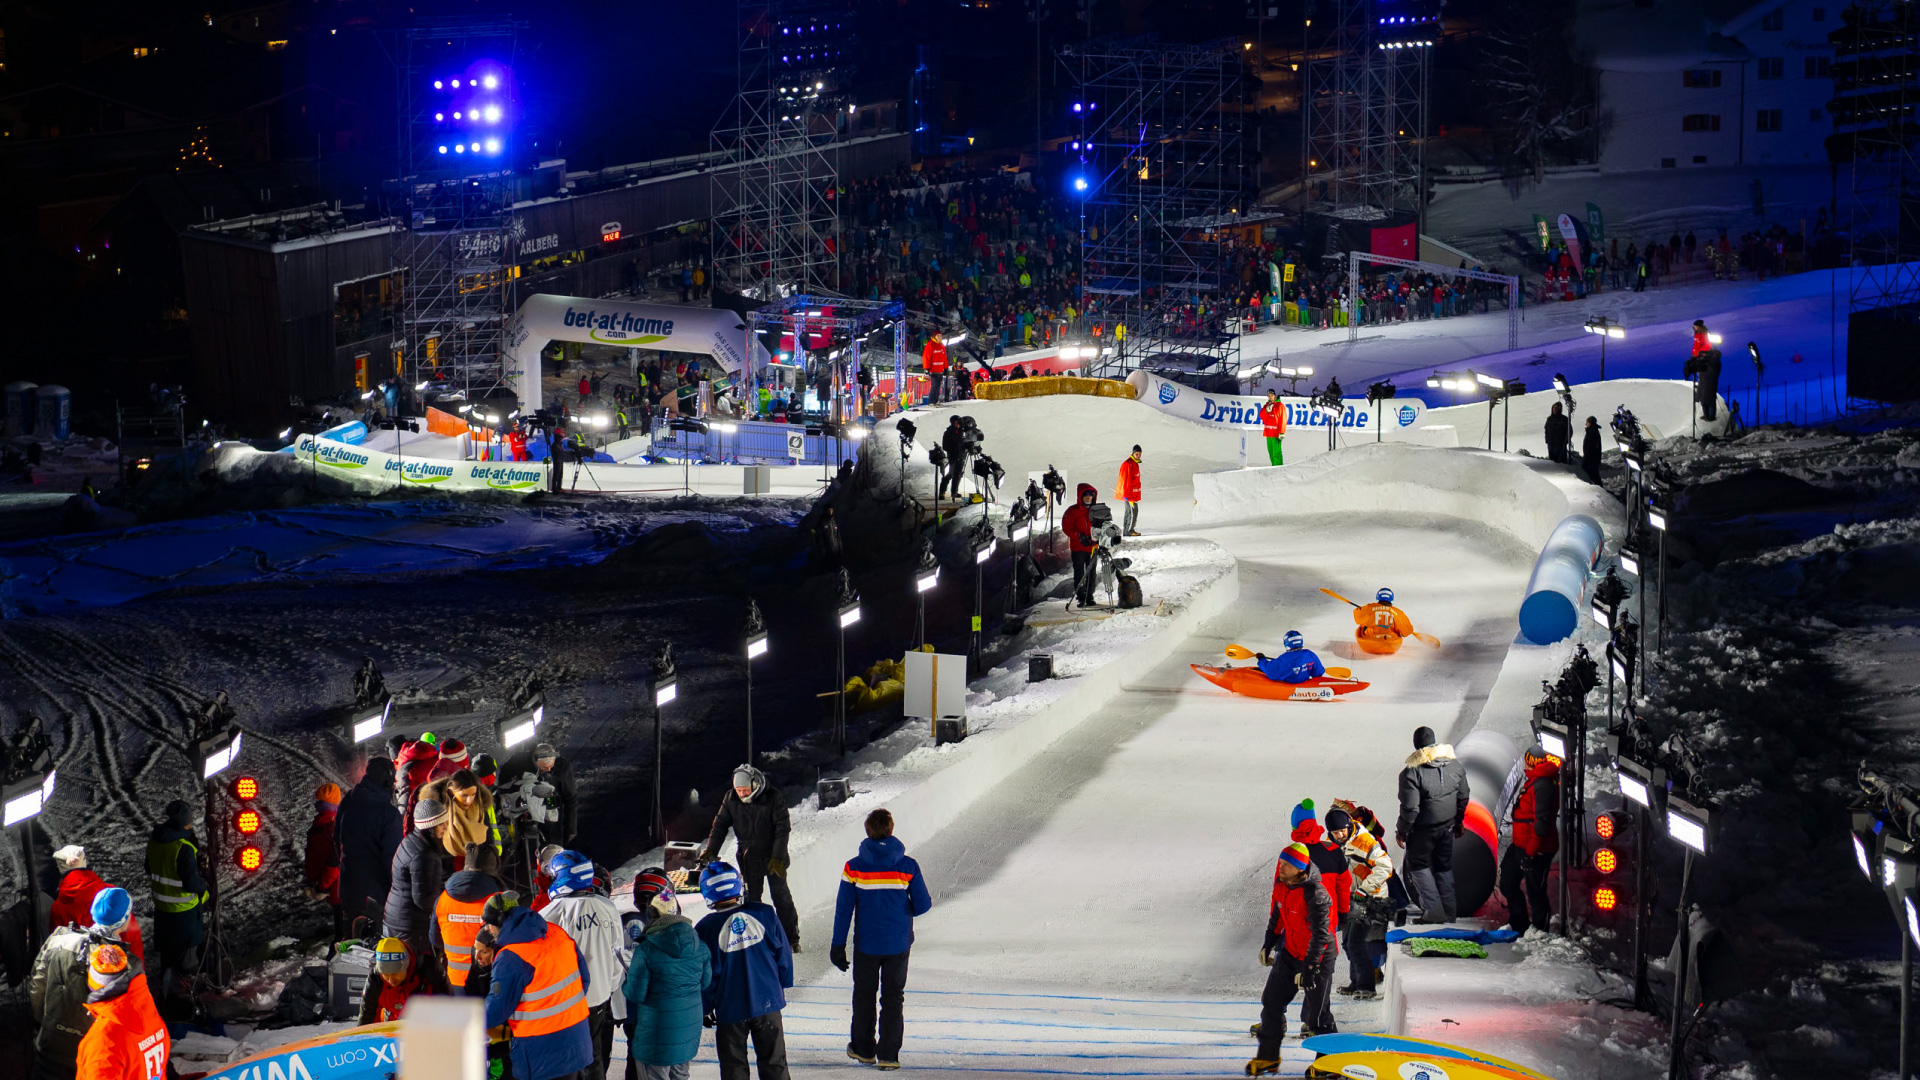 PRG provided the lighting for the course and an LED wall for the spectators at the ProSieben Wintergames in 2018, as well as the sound system for the spectator area.